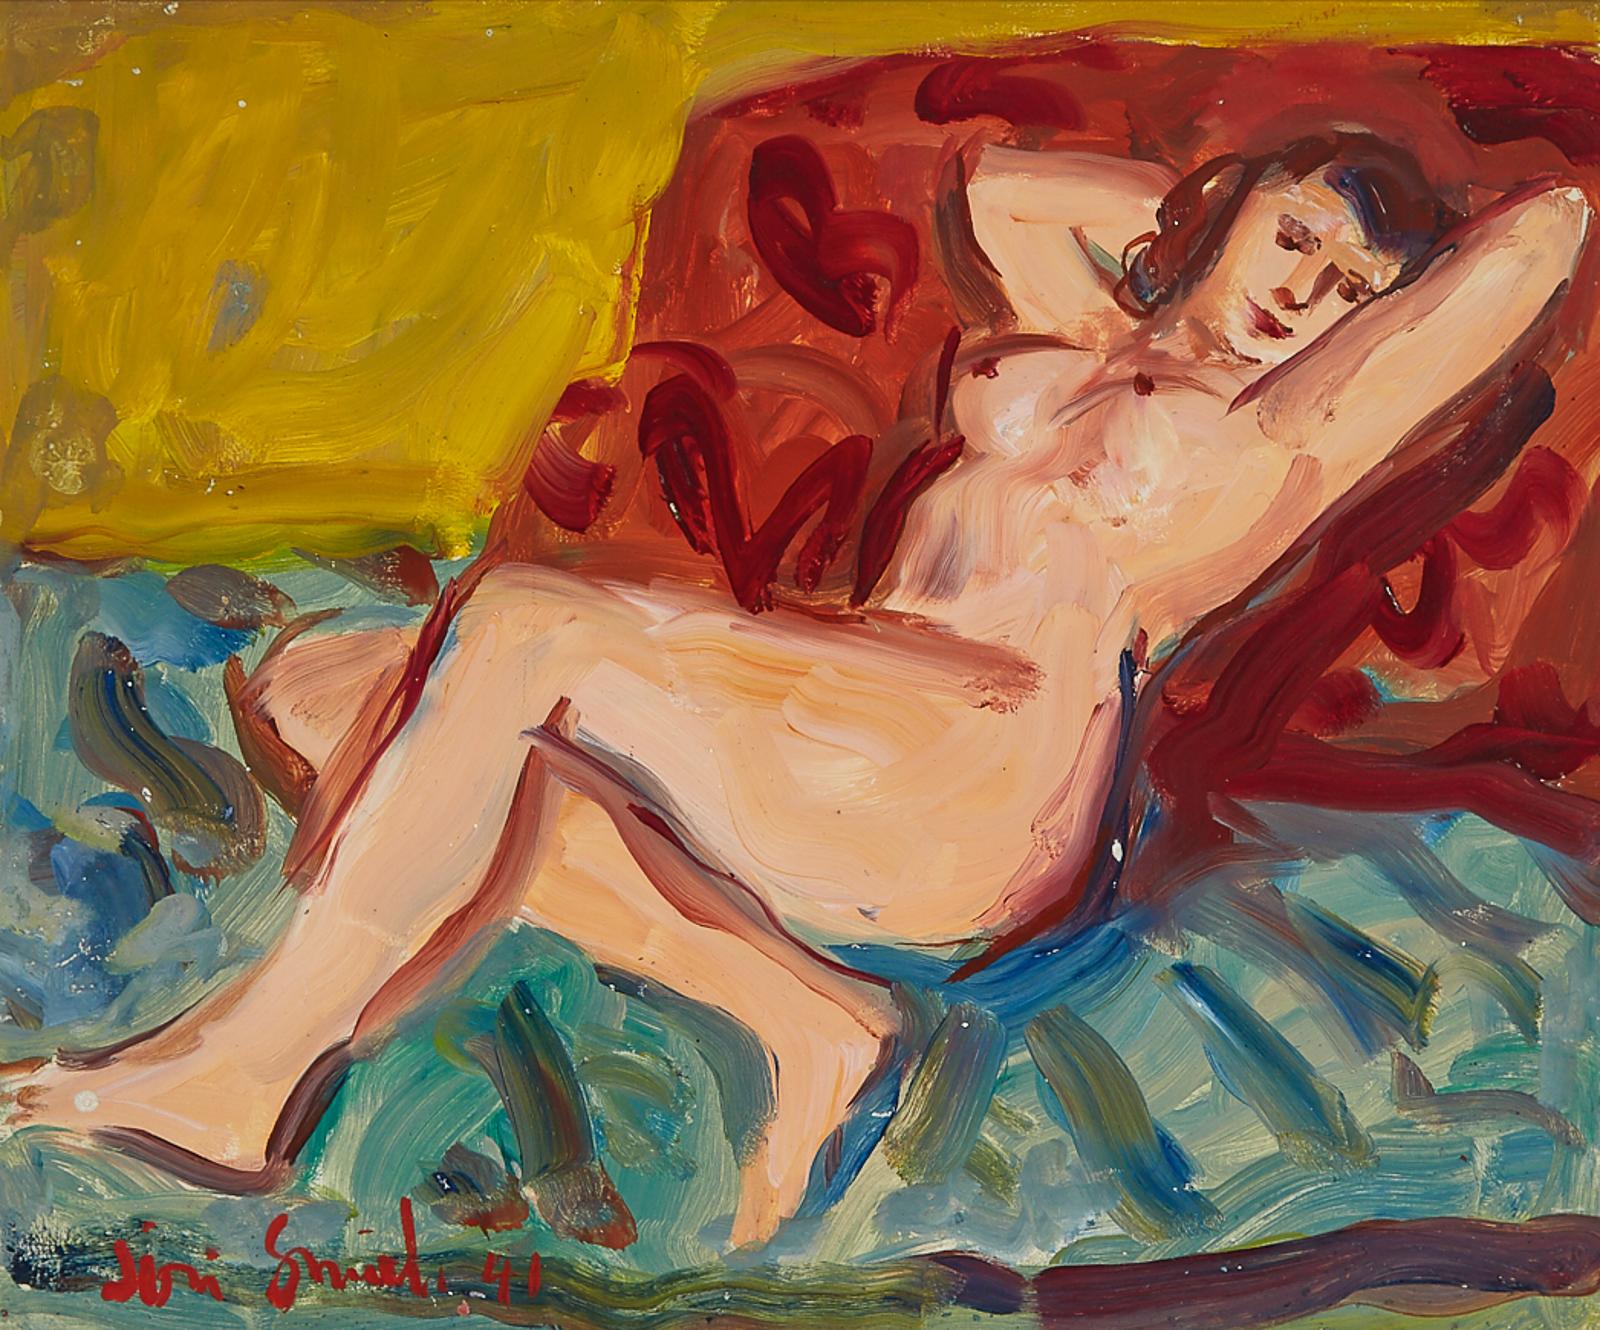 Marjorie (1907-2005) - Nude On A Couch, 1941